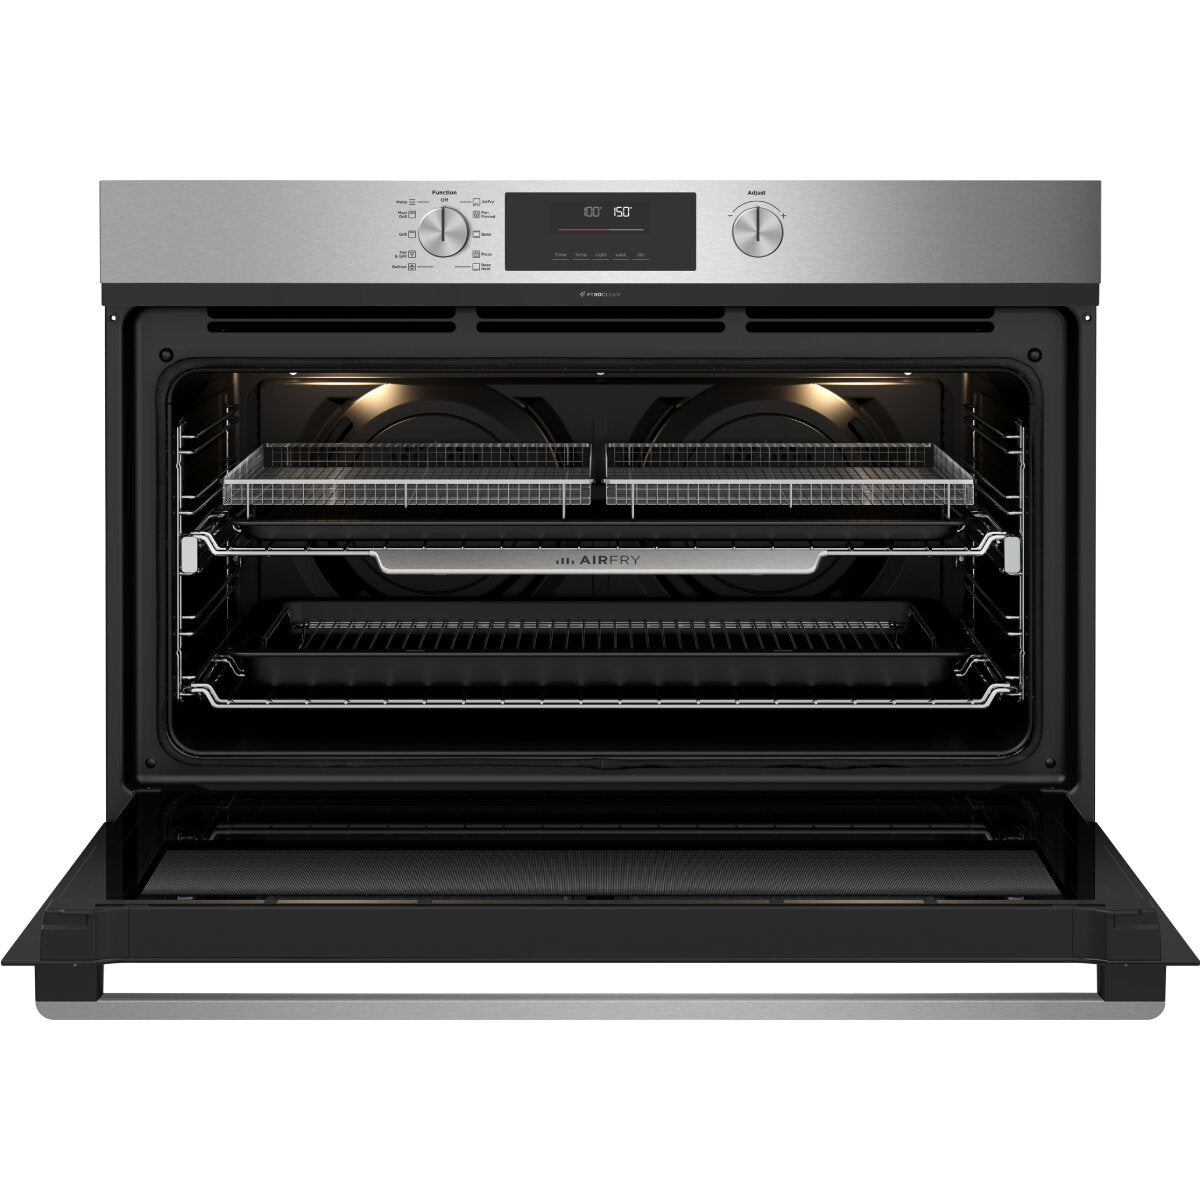 Westinghouse 90cm Multi-Function Pyrolytic Oven with AirFry Stainless Steel WVEP9716SD